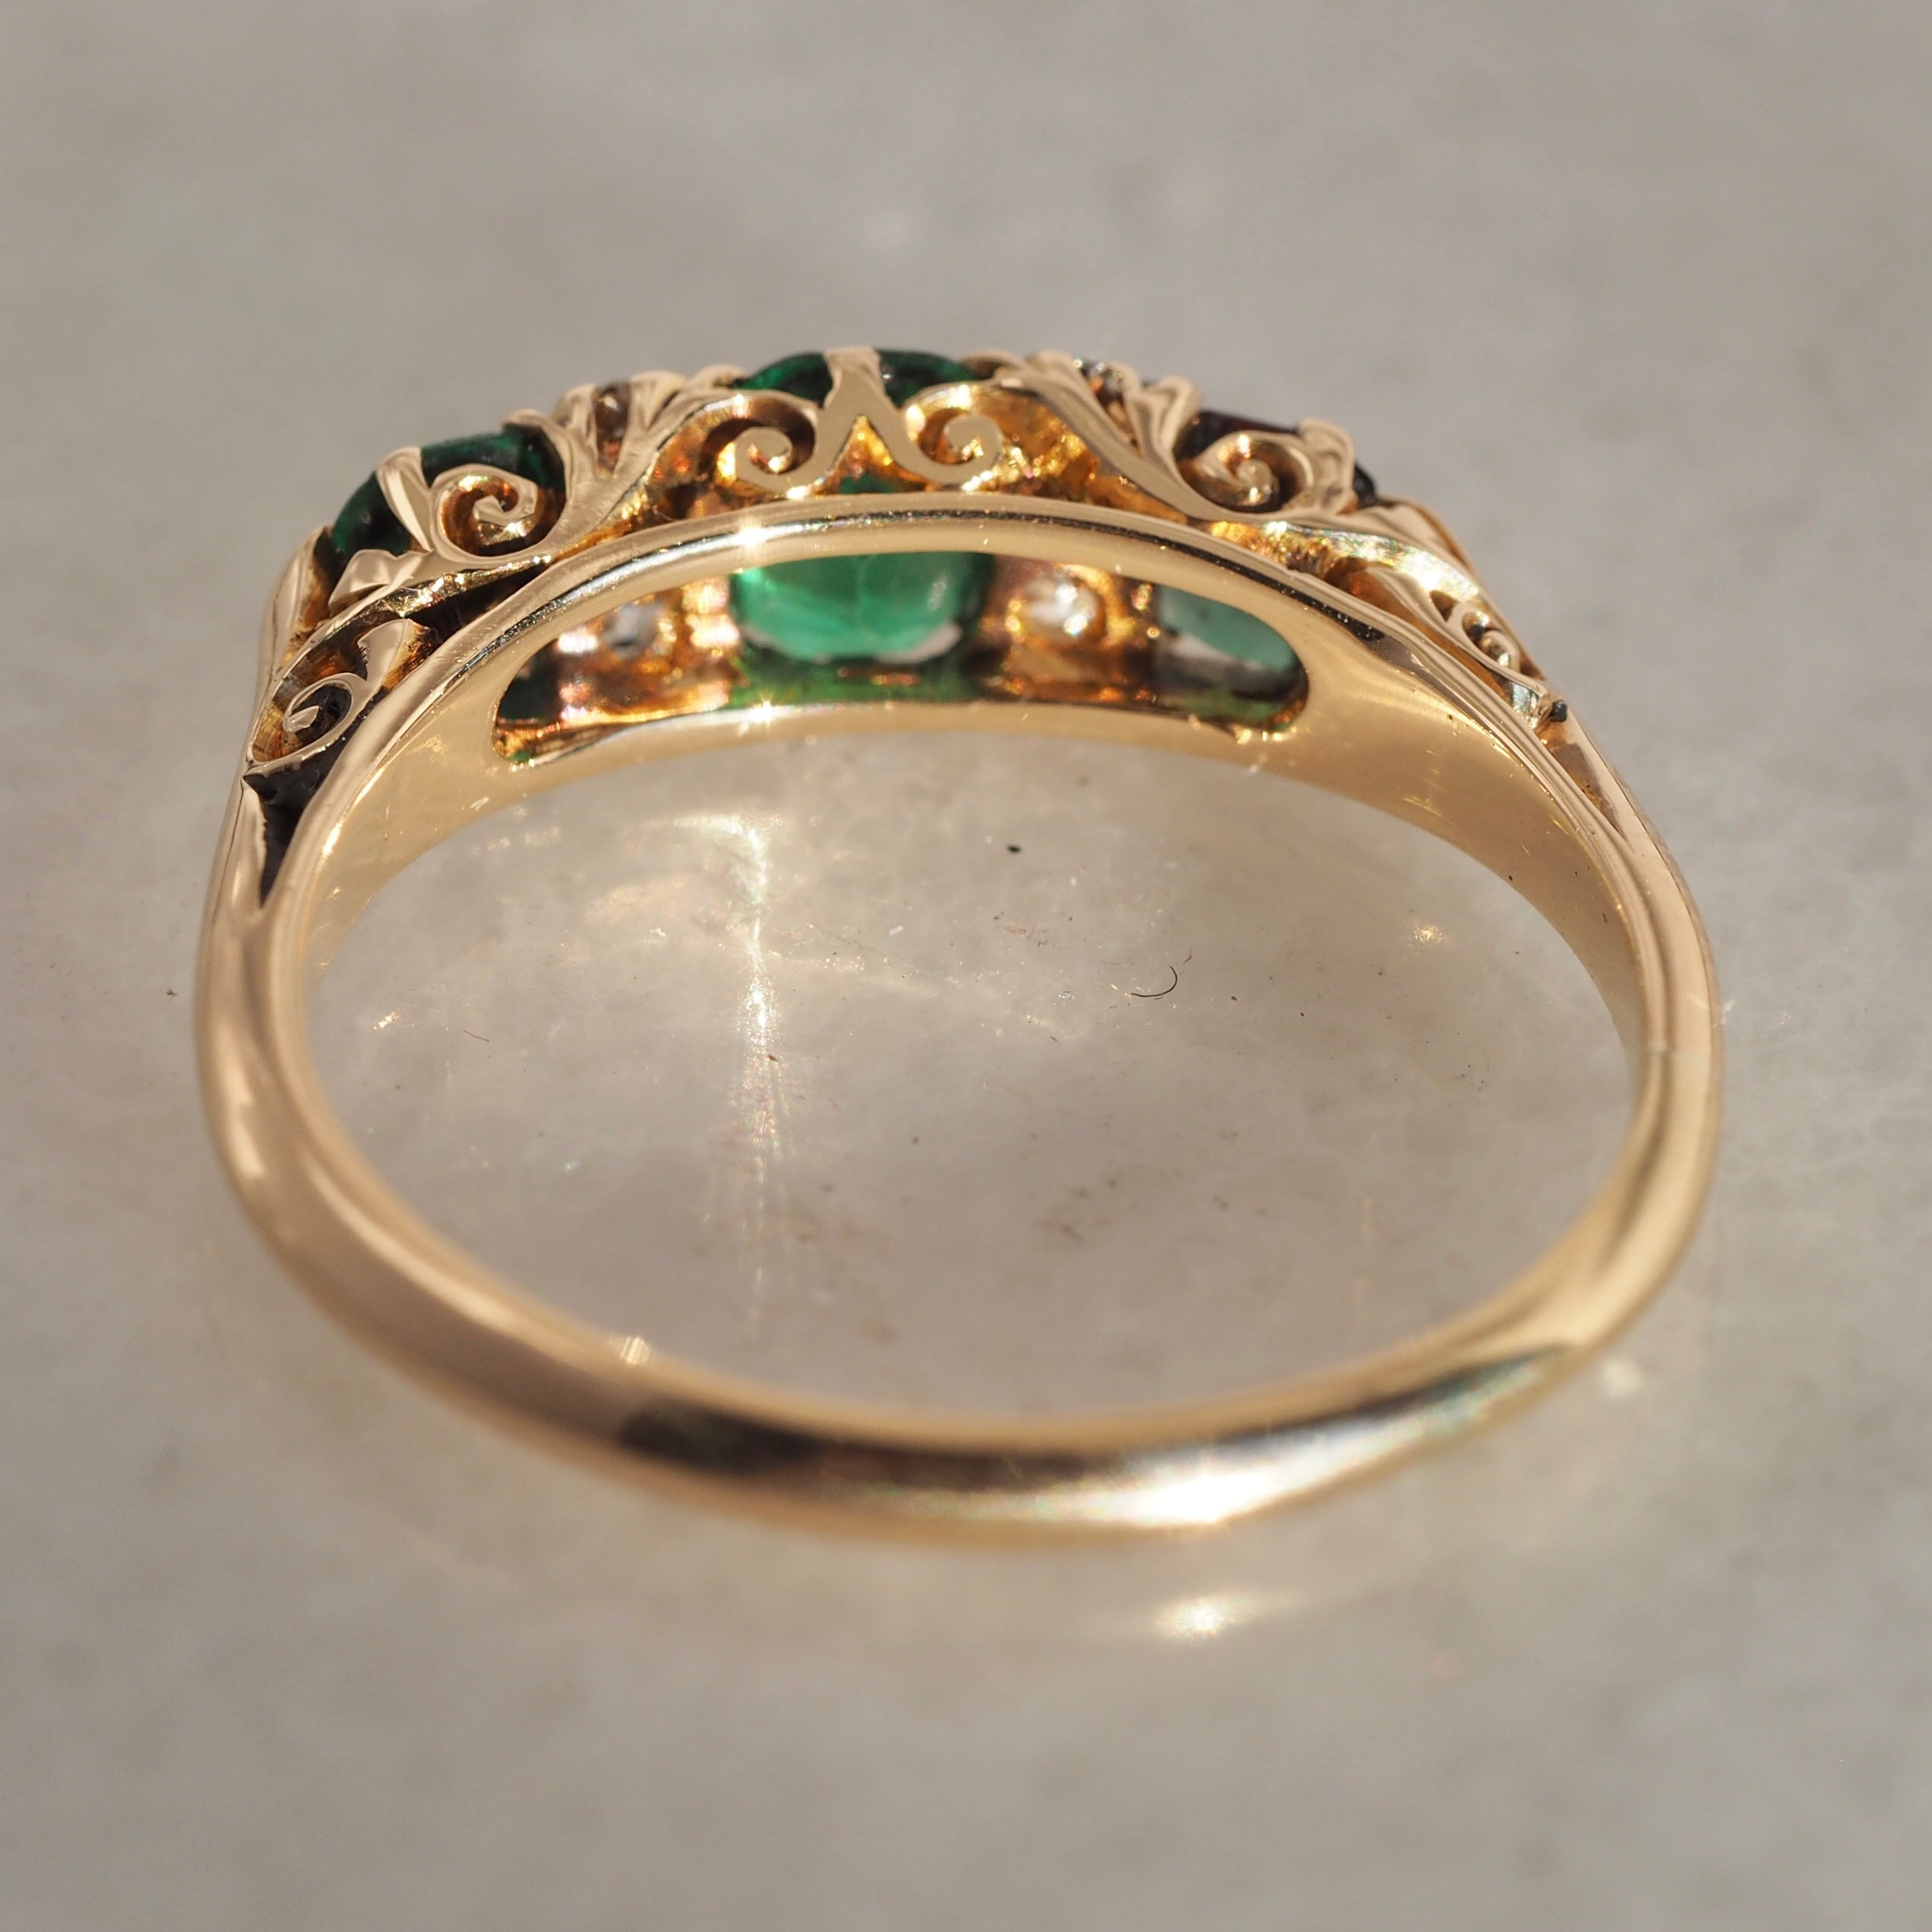 Antique Edwardian English 18k Gold Emerald and Old Mine Cut Ring